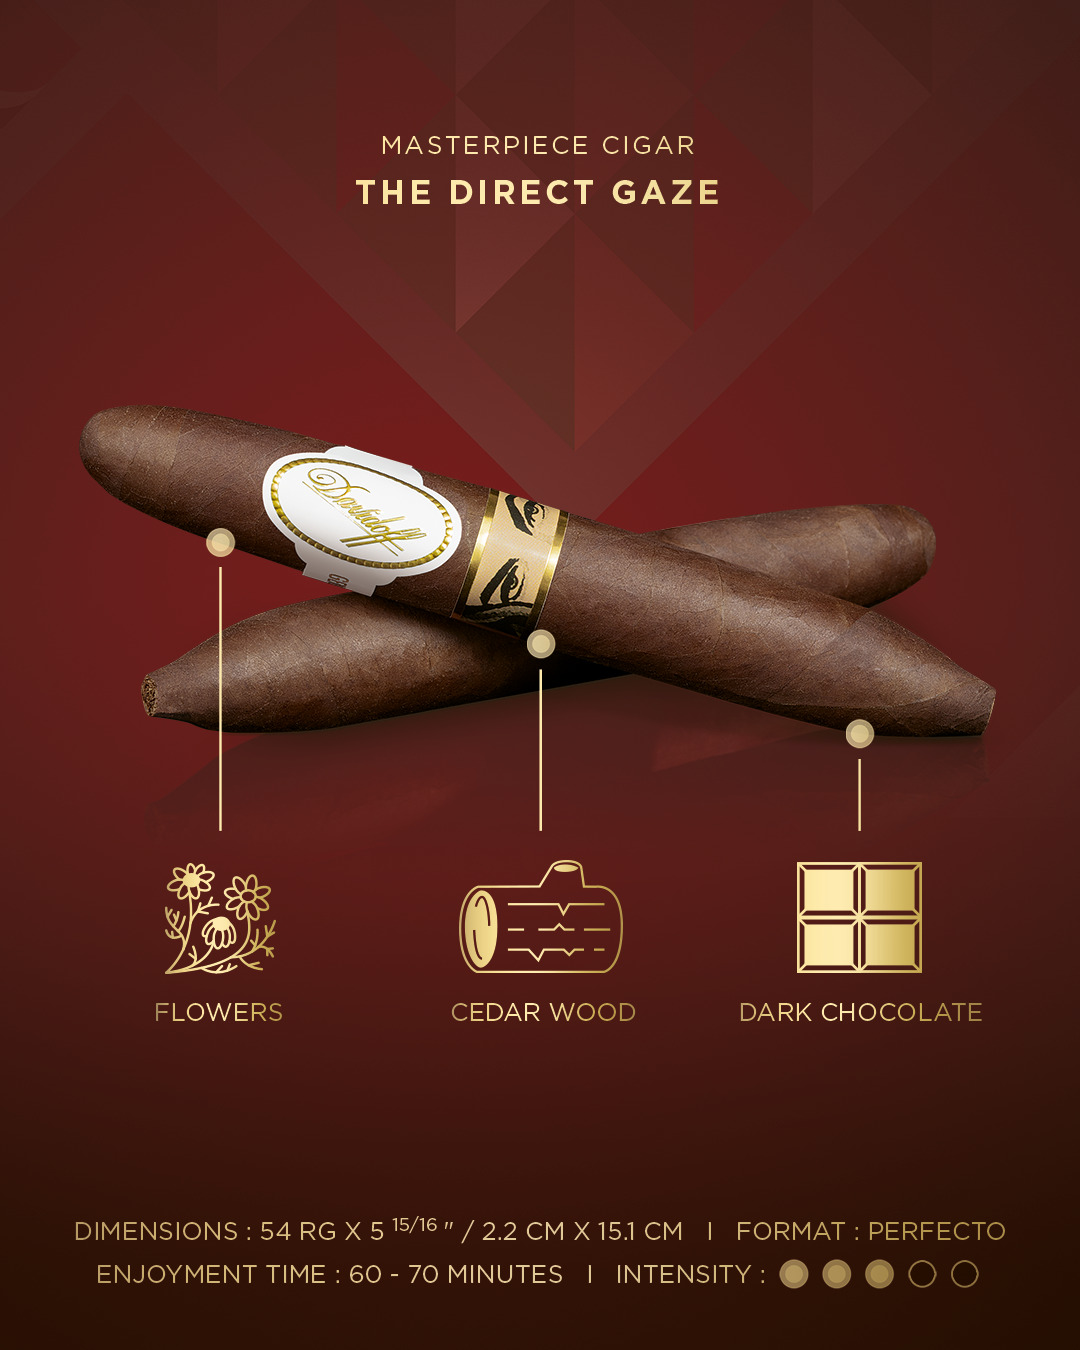 Two perfecto cigars which come with the Davidoff & Boyarde Masterpiece Humidor The Direct Gaze with blend details displayed, such as main aromas, enjoyment time and intensity.